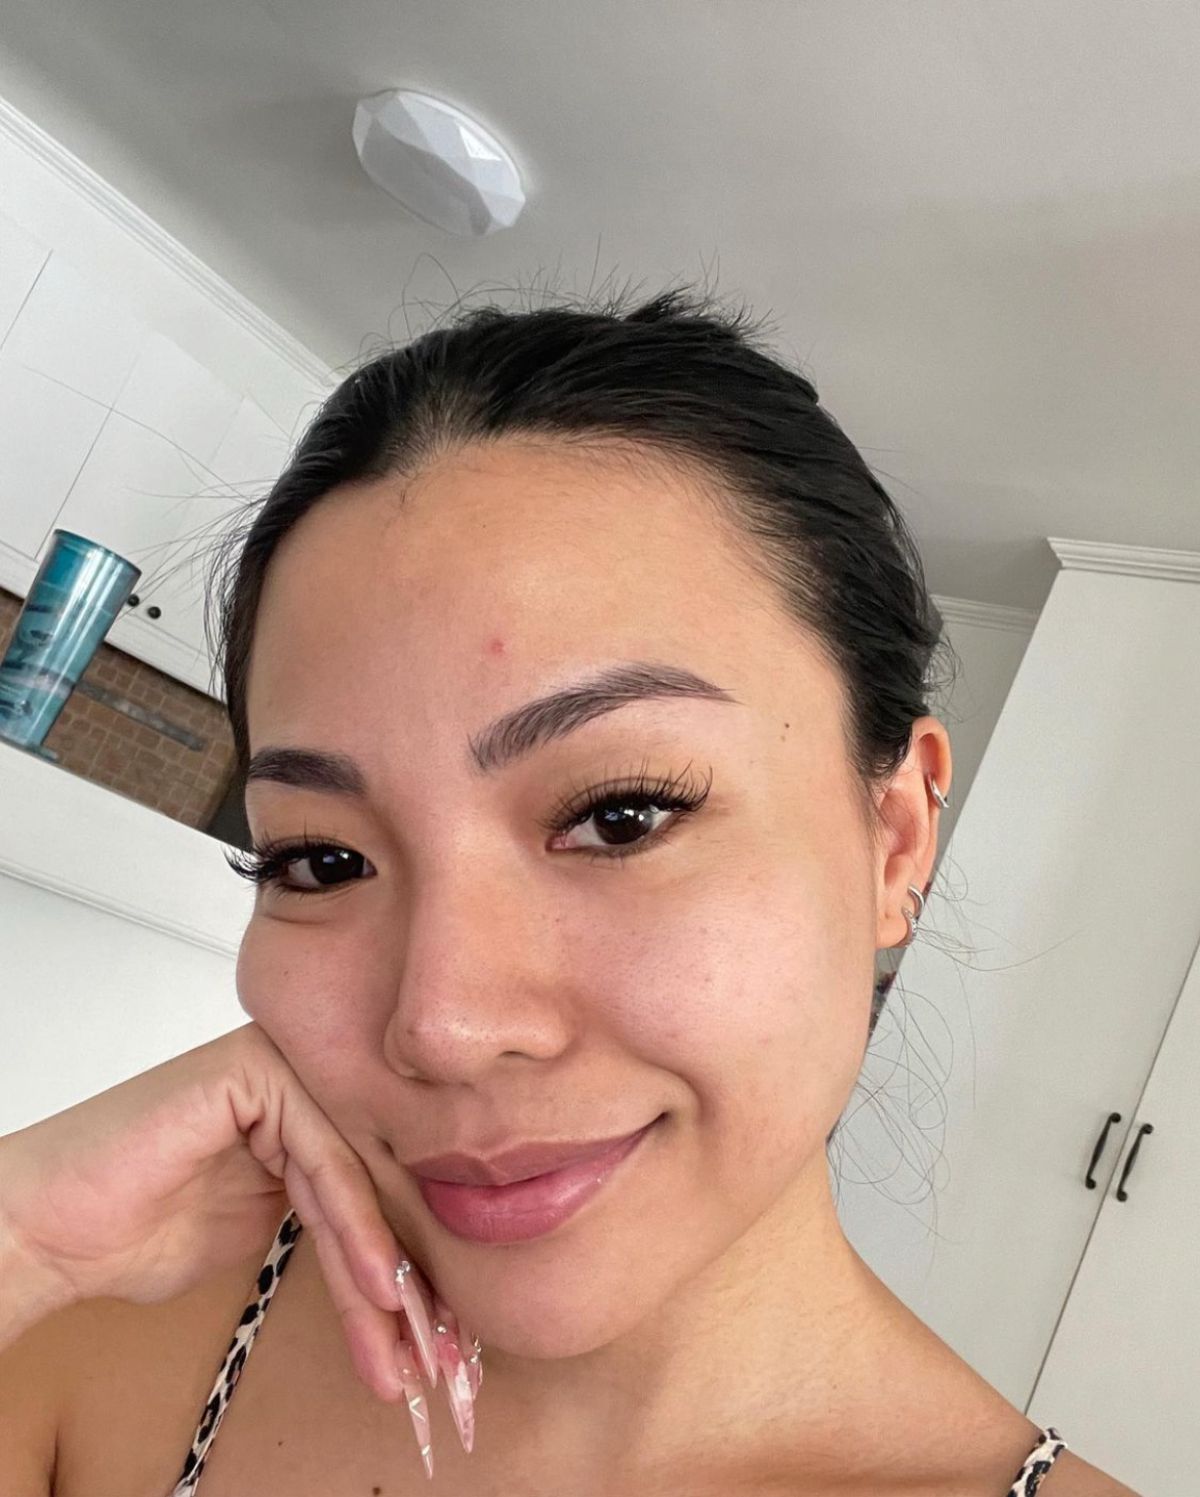 skin and body positivity posts from filipino influencers